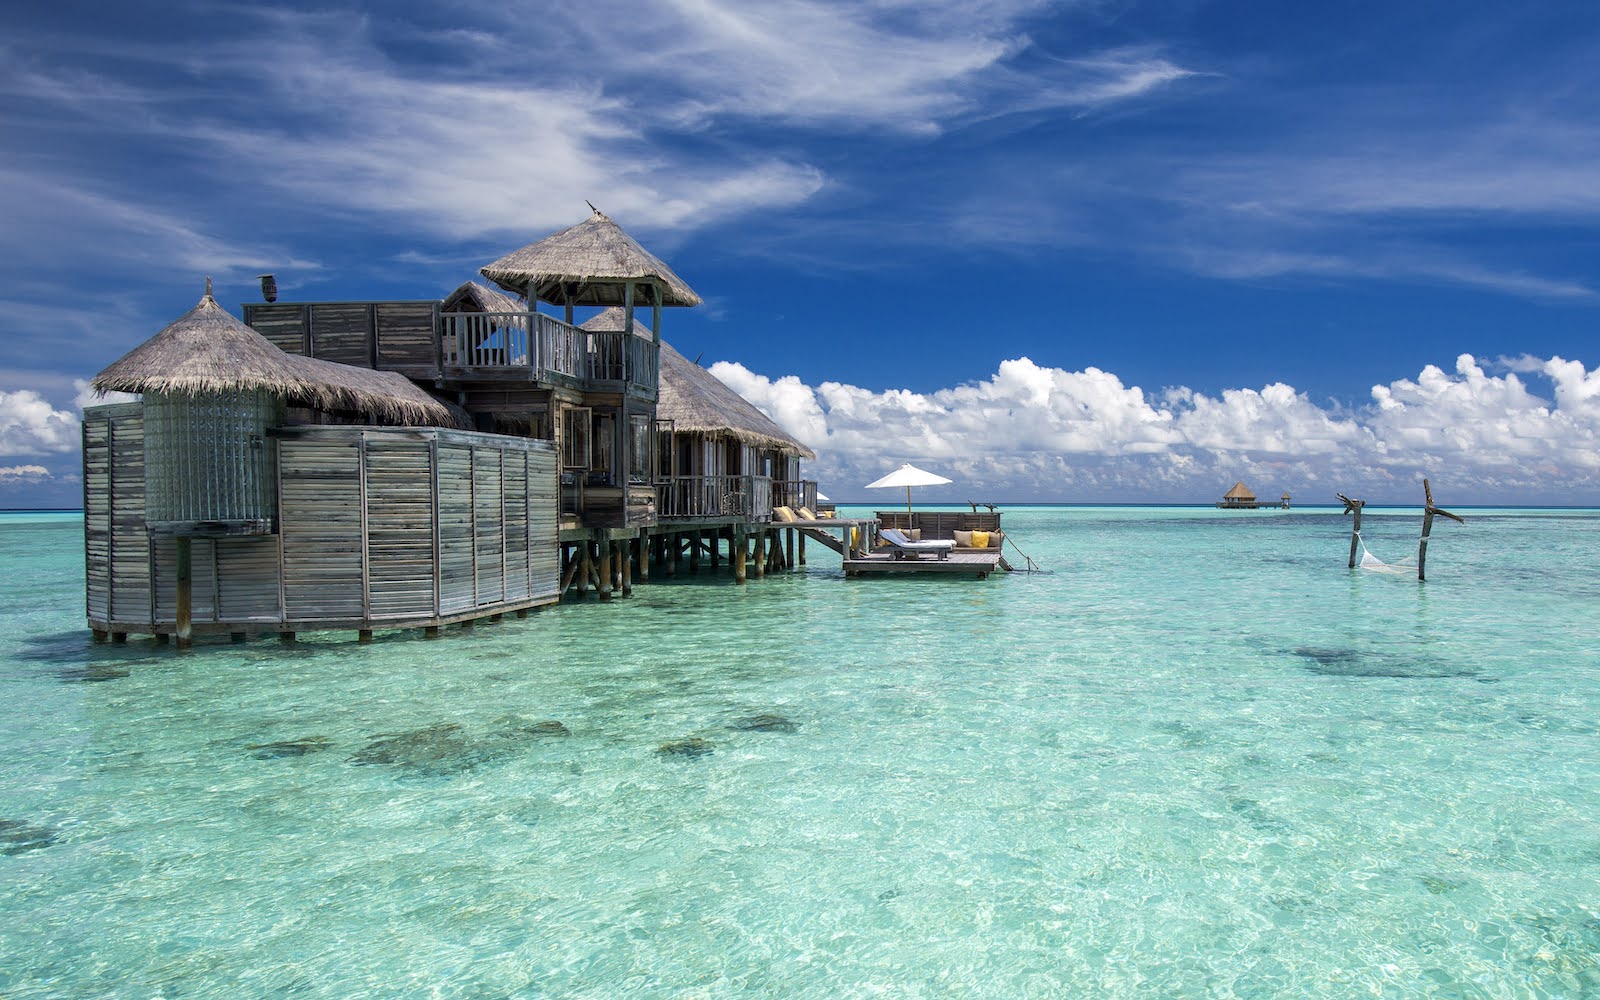 Crusoe Villas, in the middle of the ocean in the Maldives at Gili Lankanfushi